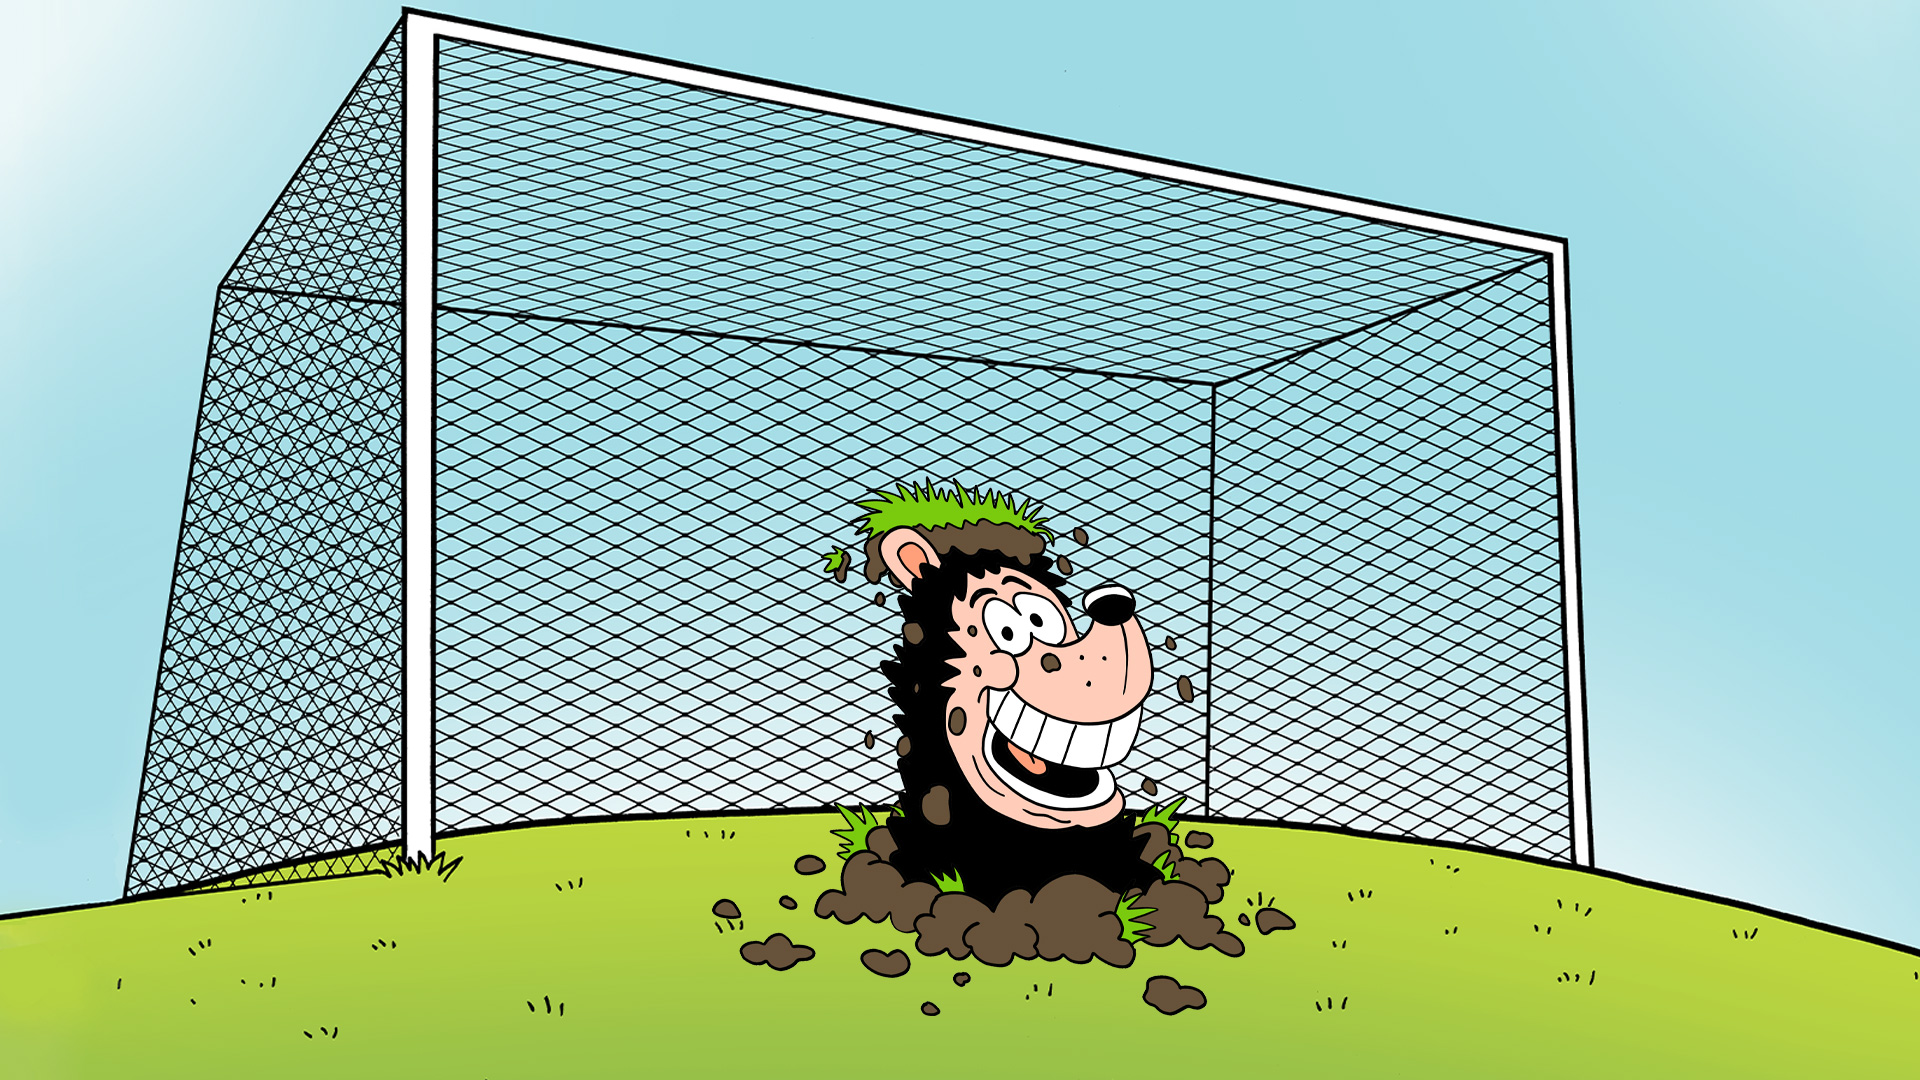 Gnasher appearing in the soil in front of a goal